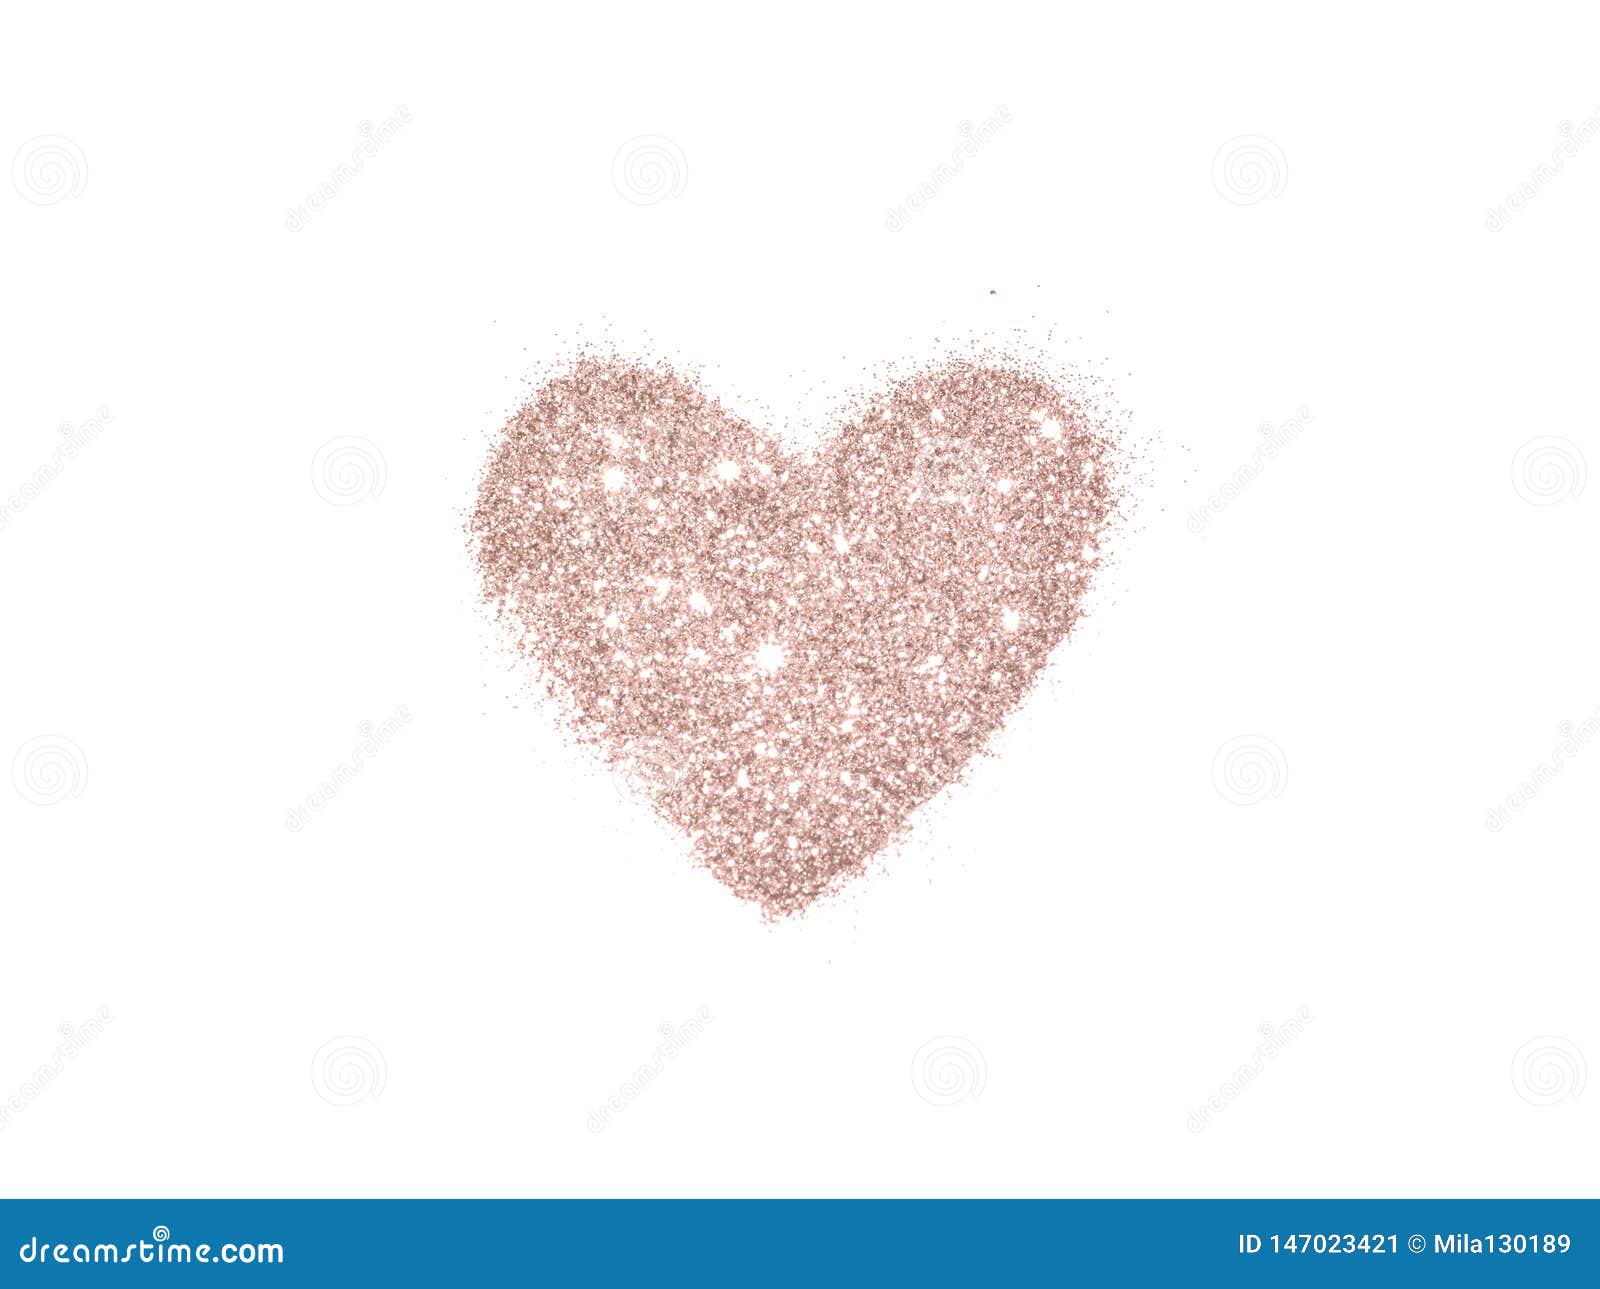 Vector Heart Shaped Background Rose Gold Stock Vector Royalty Free  1293561418  Shutterstock